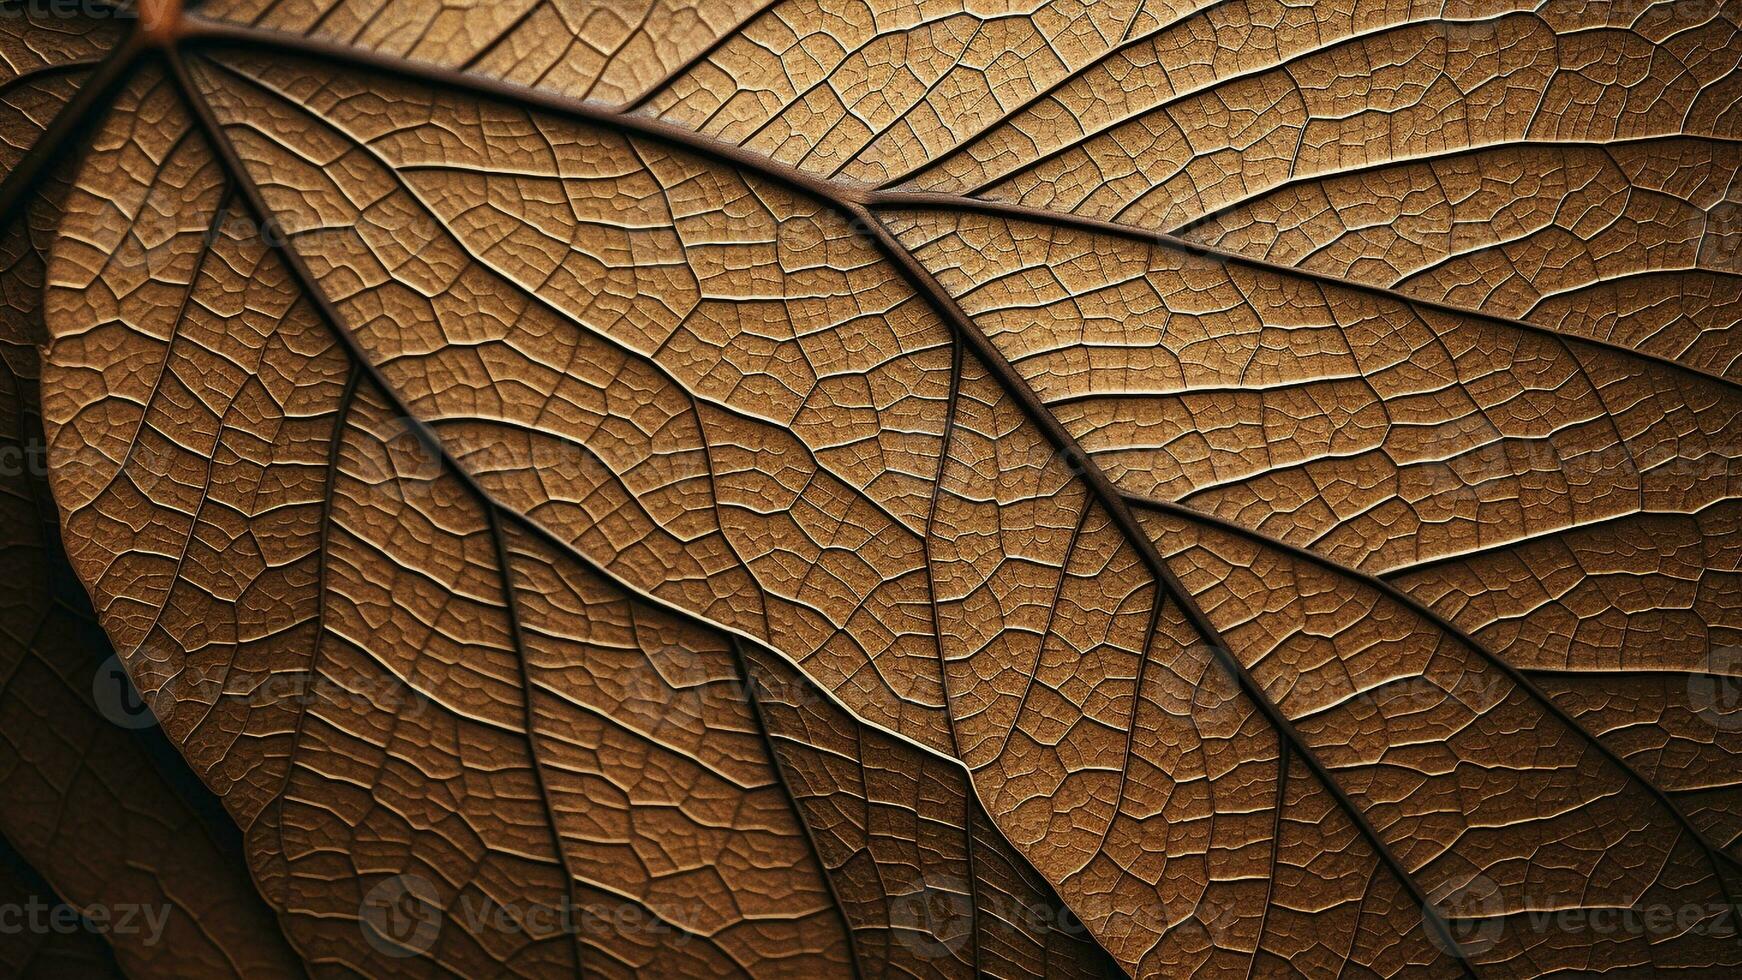 Luxury Leaf Texture Designs with Opulent Foliage Patterns, AI Generative photo